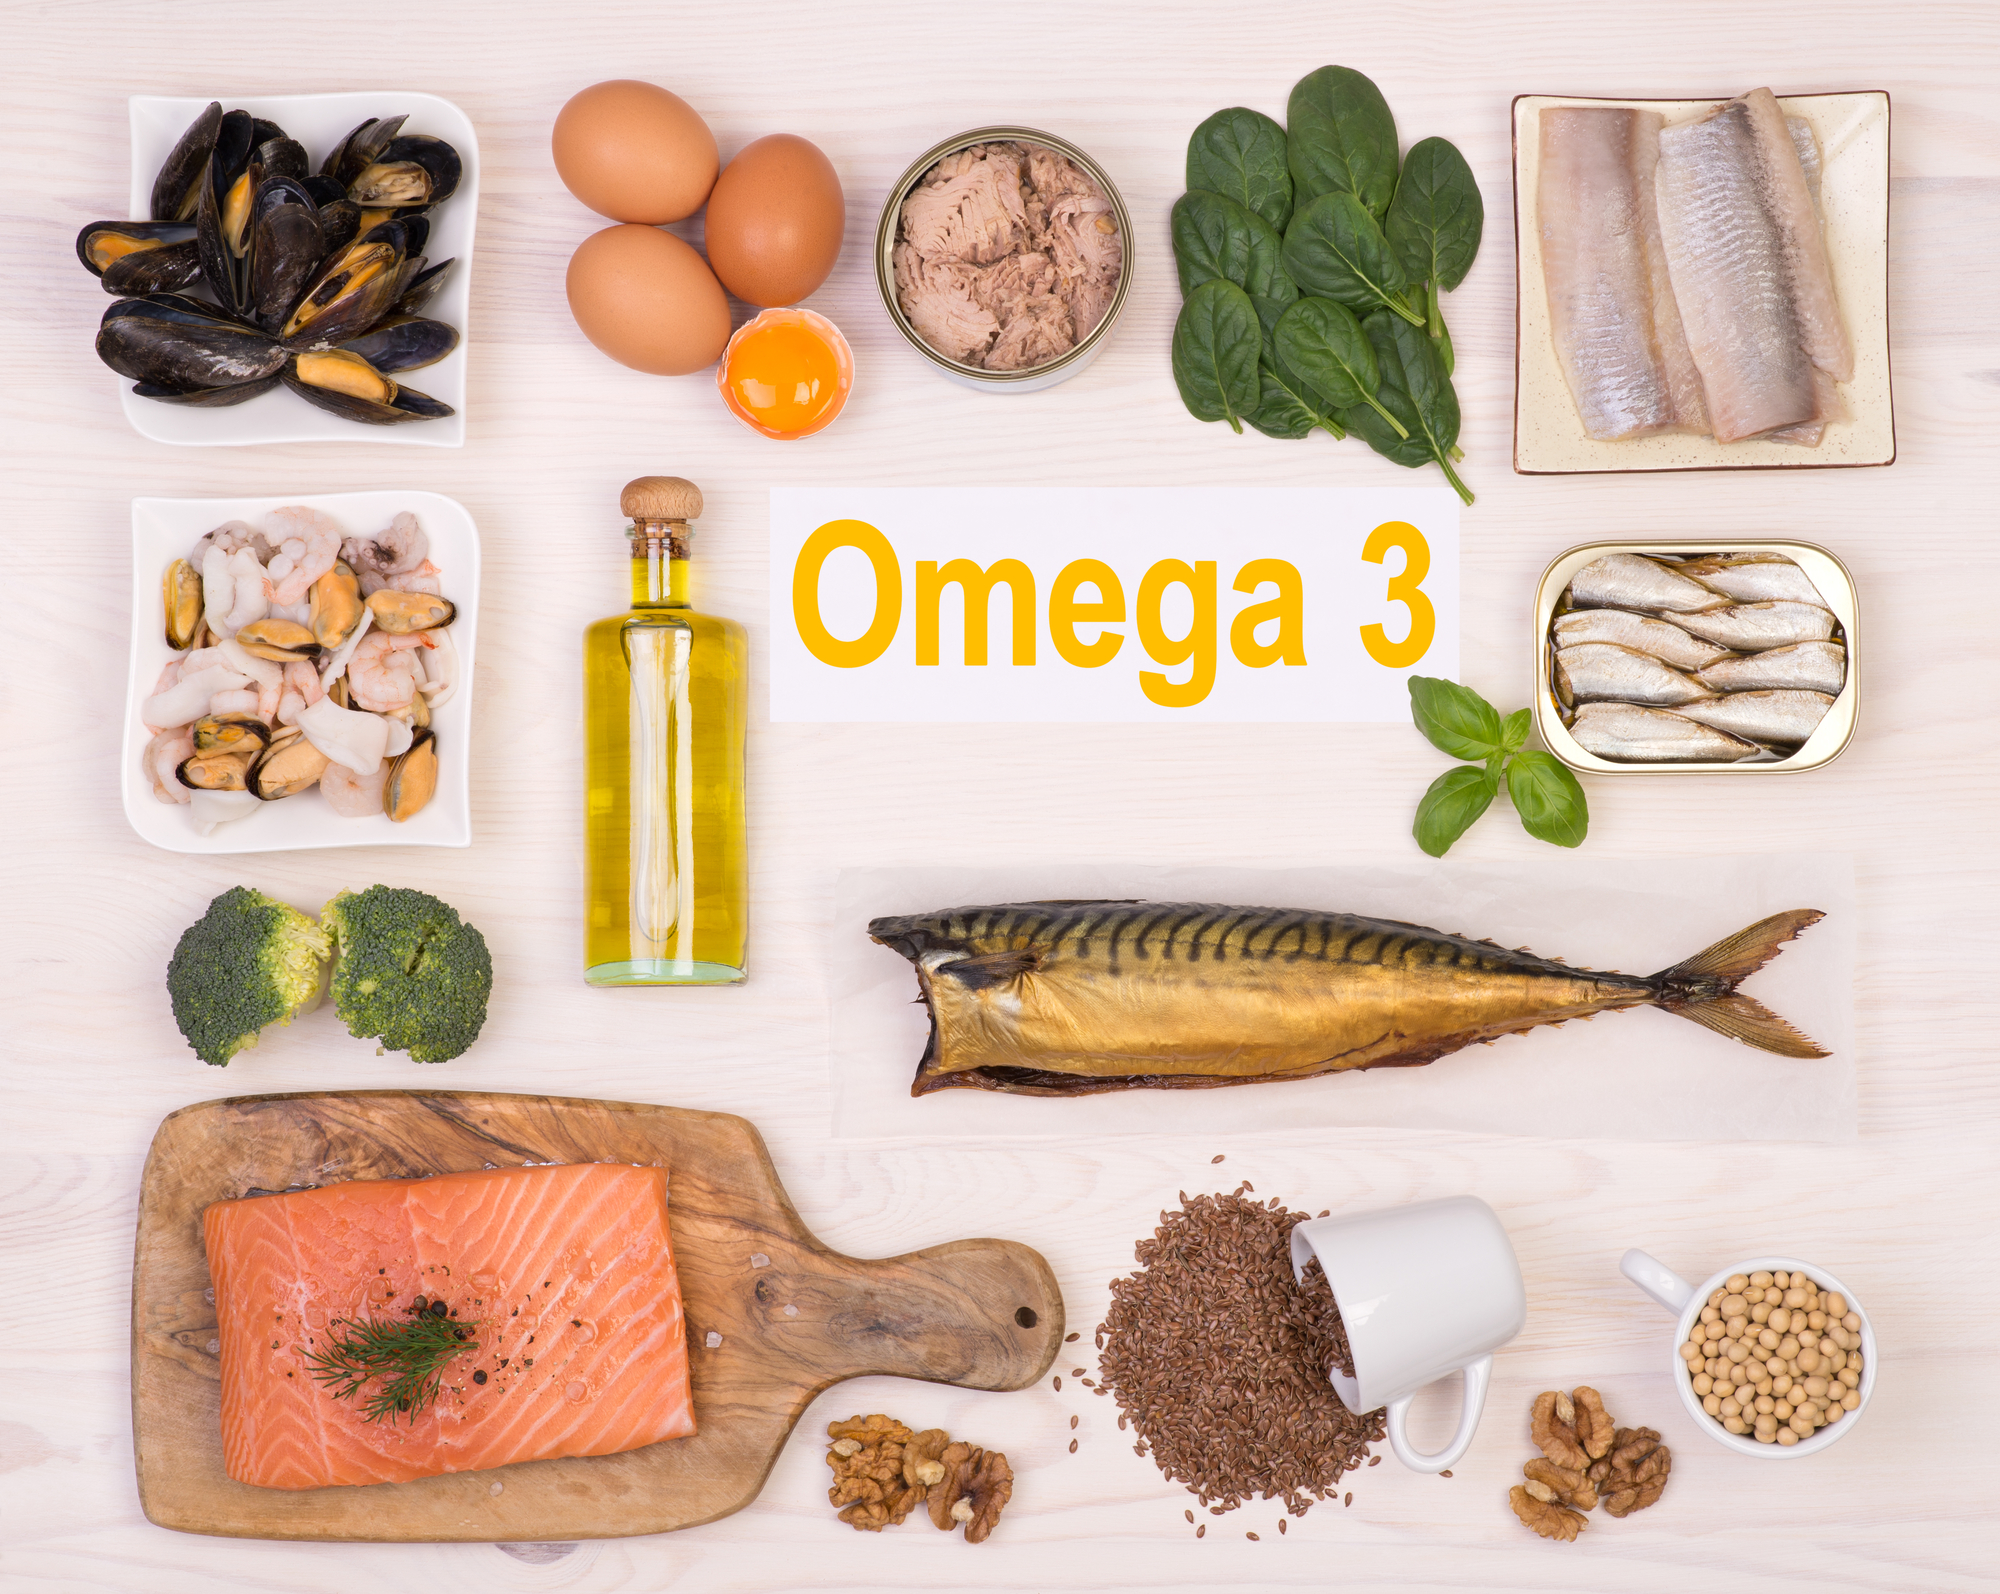 7 Foods Rich in Omega-3 Fatty Acids - For Help with ADHD, Autism